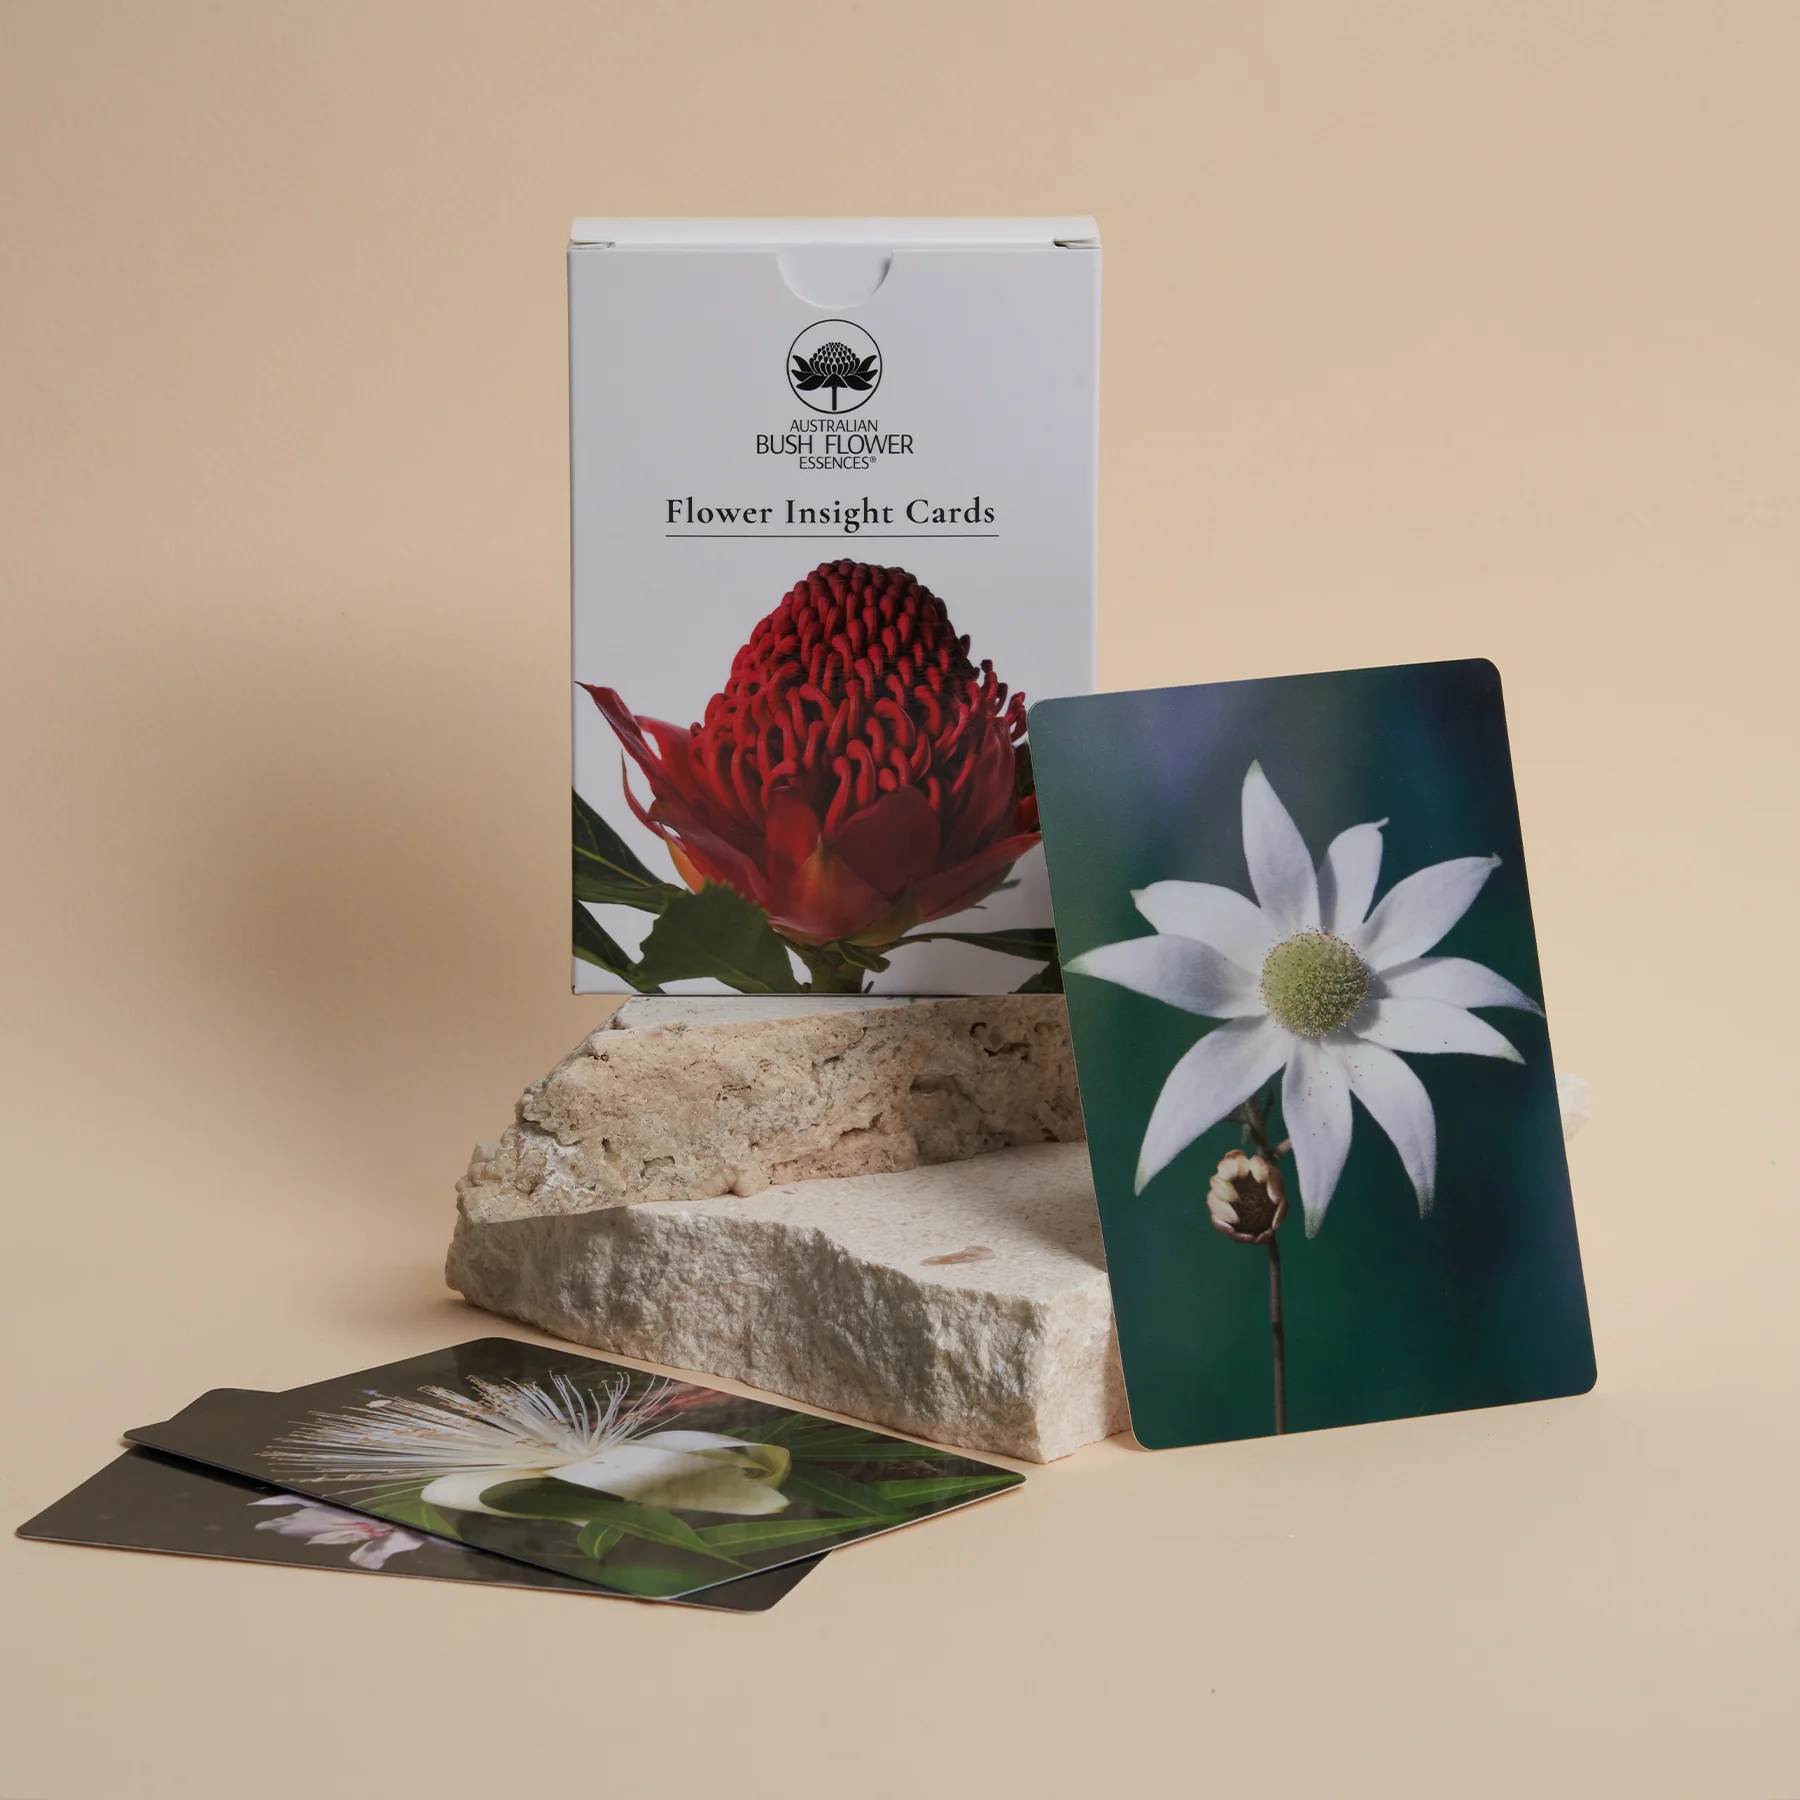 ABFE Flower Insight Cards